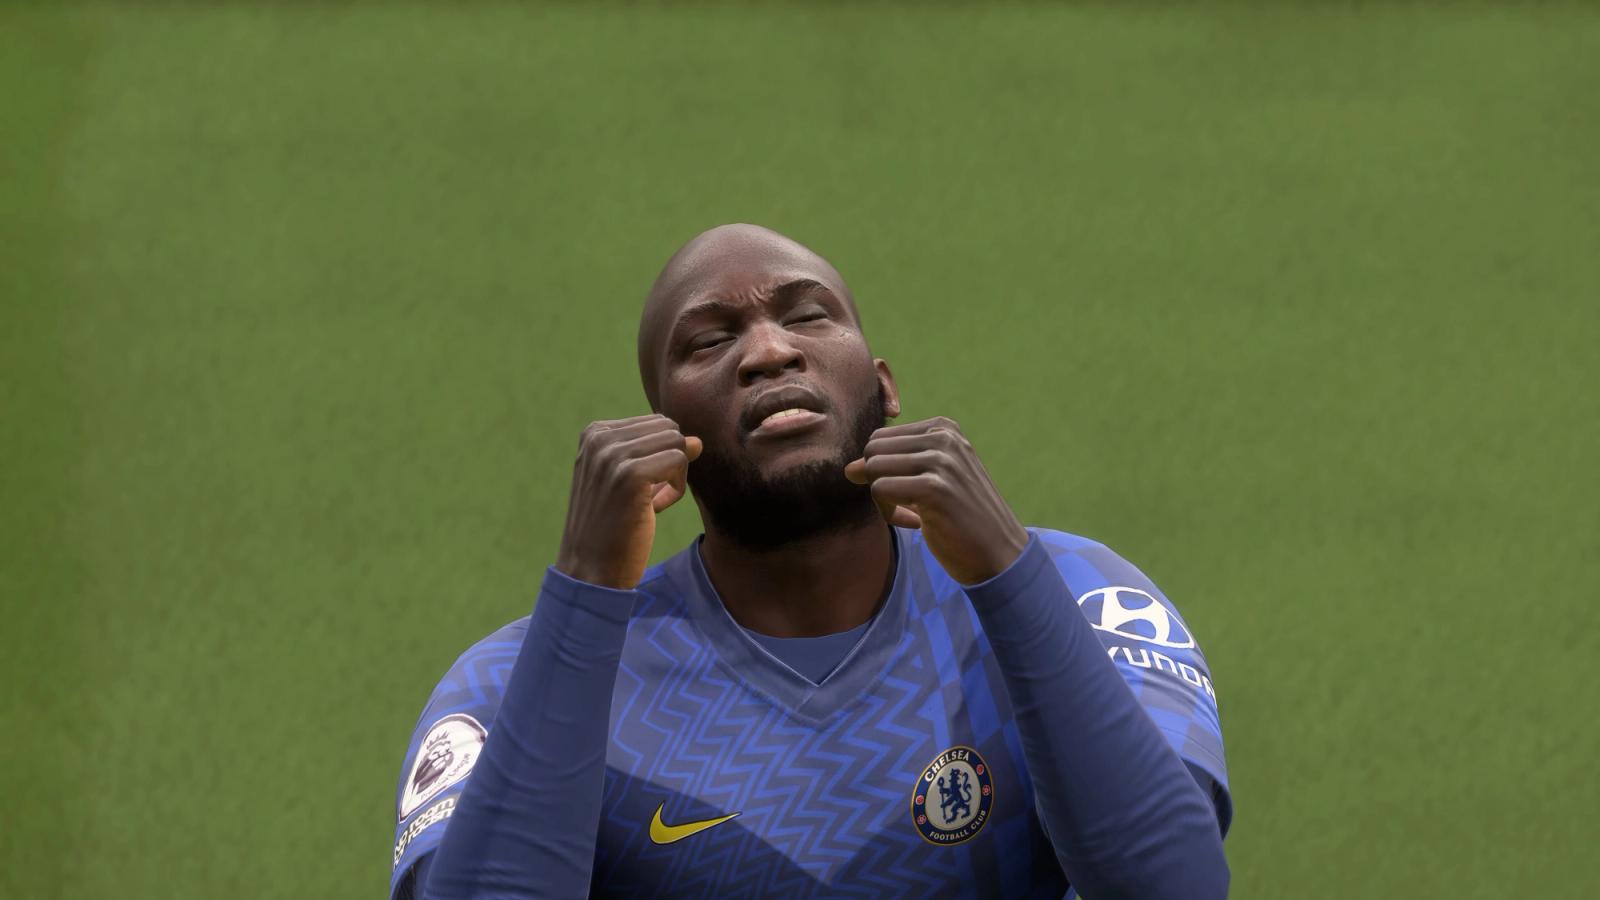 Lukaku commiserating a missed chance in FIFA 22